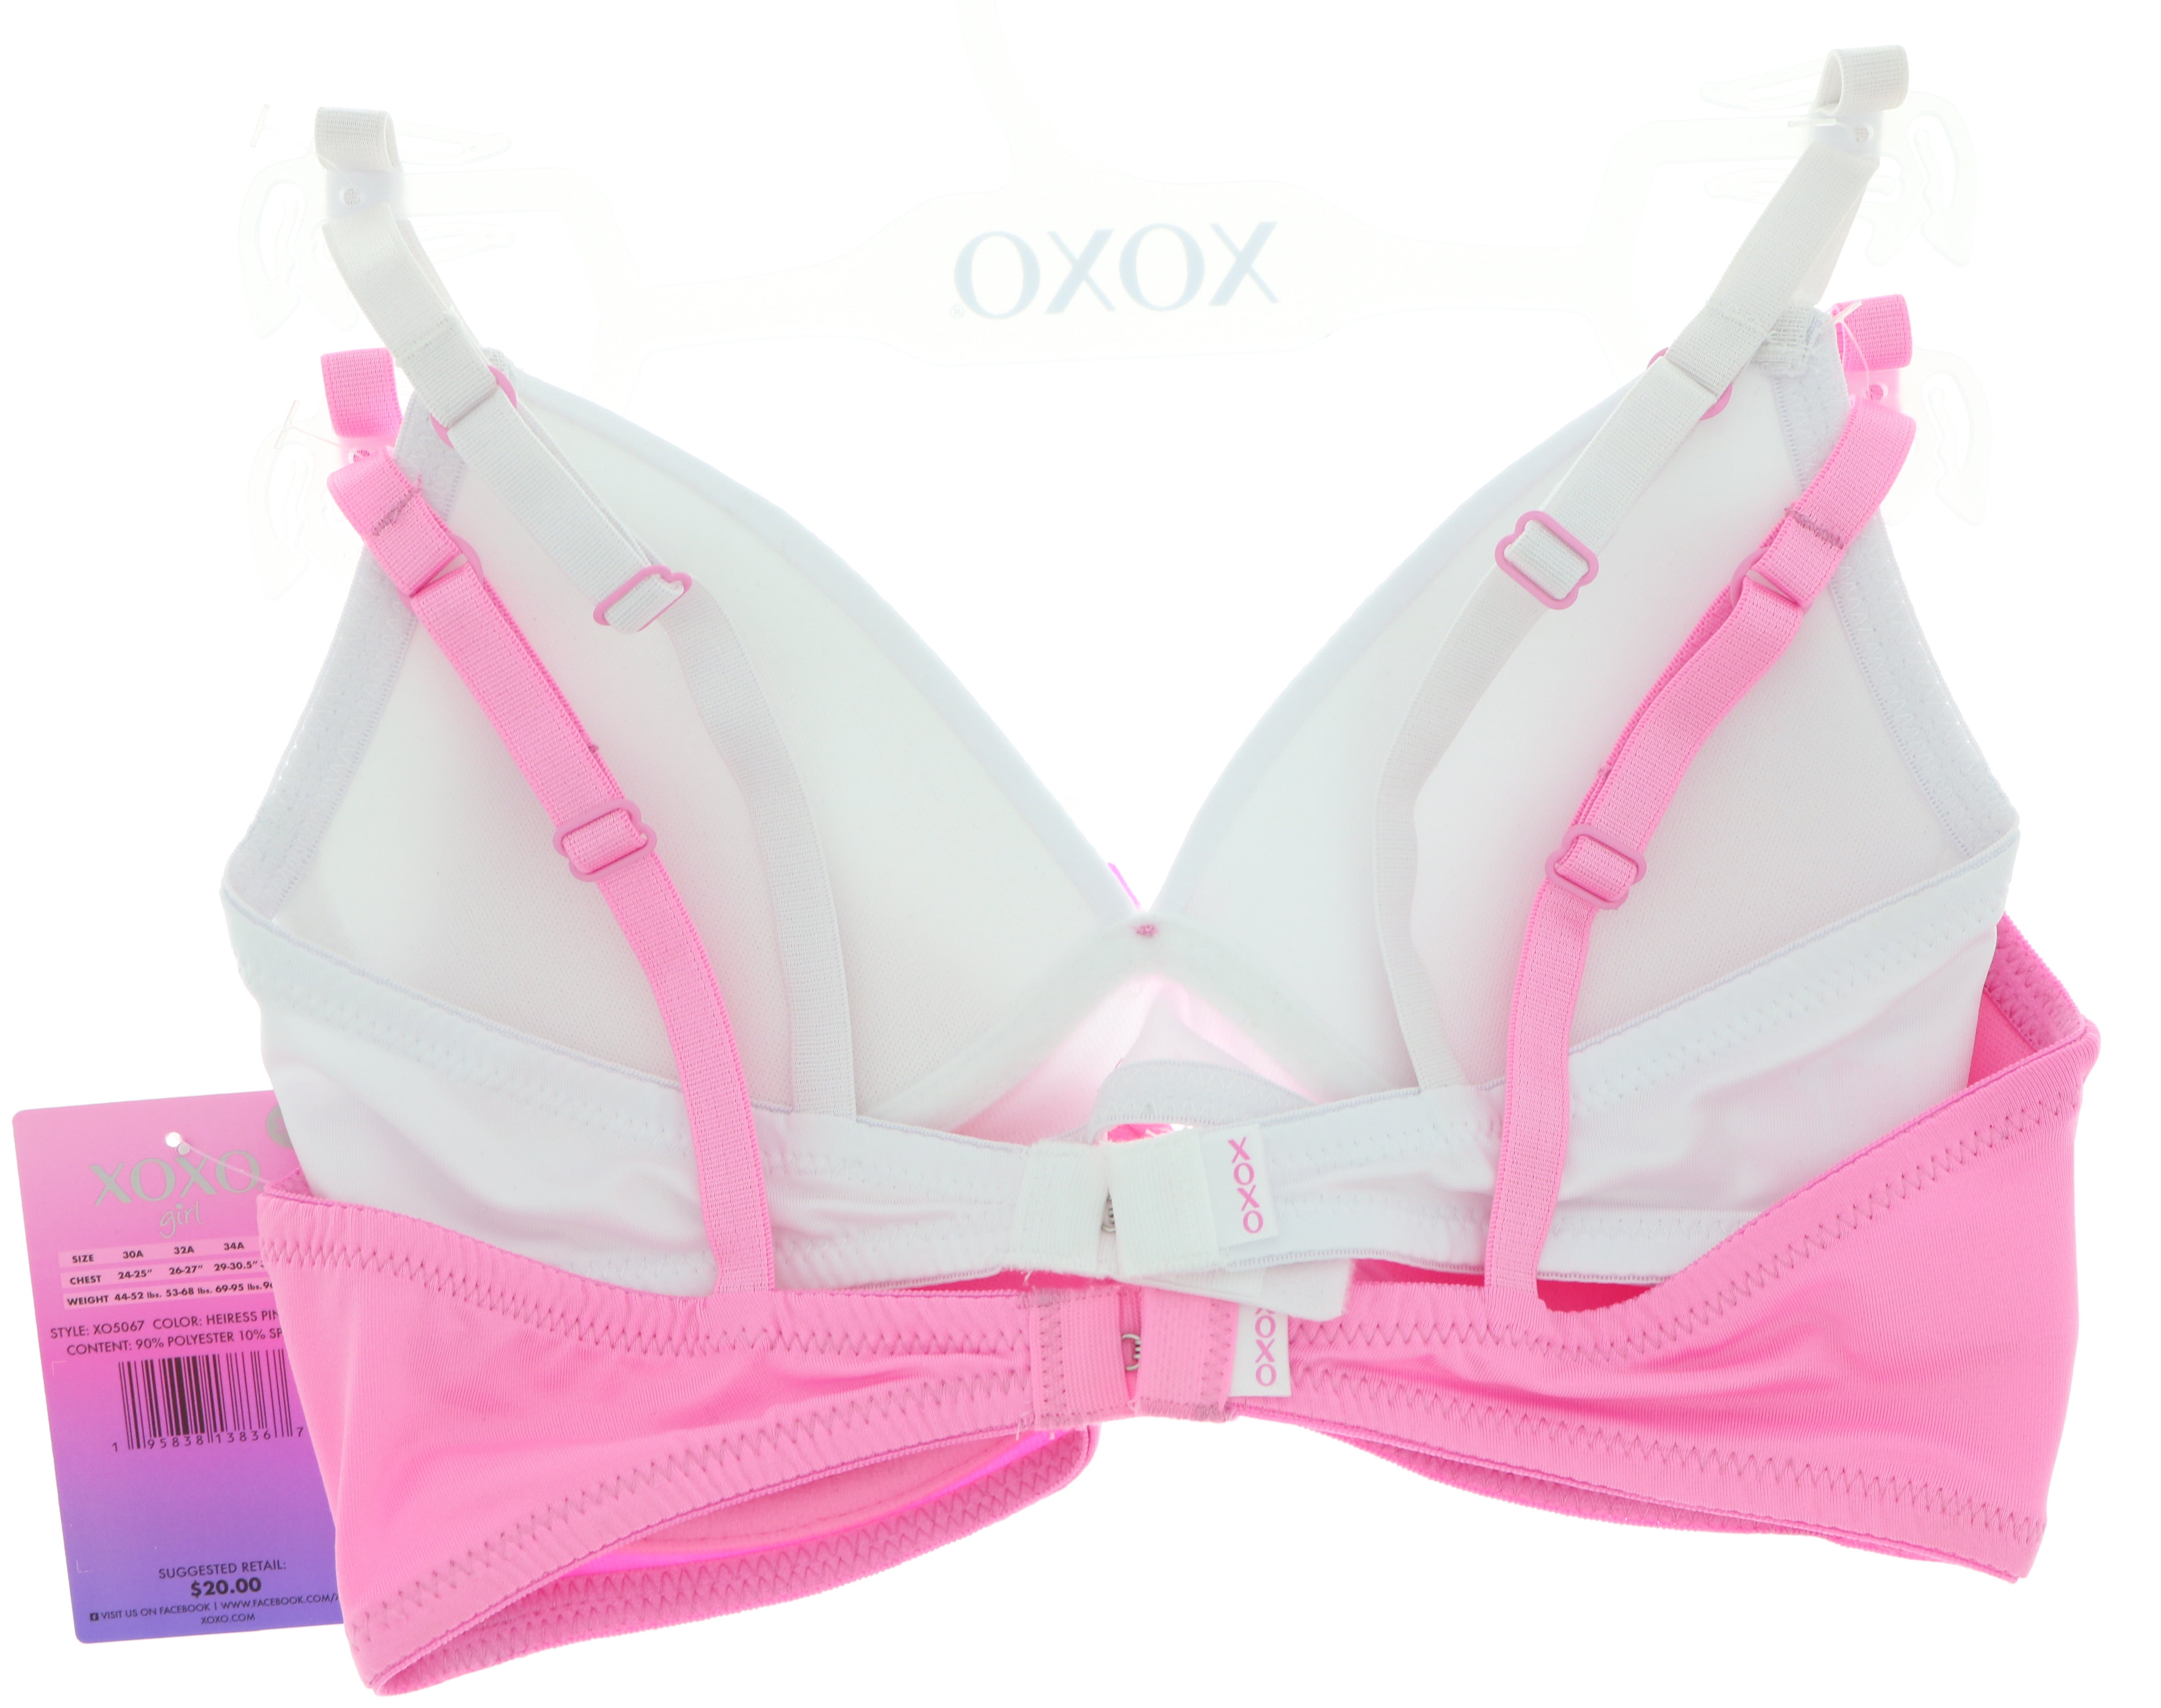 XOXO Girl's Lightly Lined Training Bra 2 Pack - Heather Grey & Pink - Small  30 